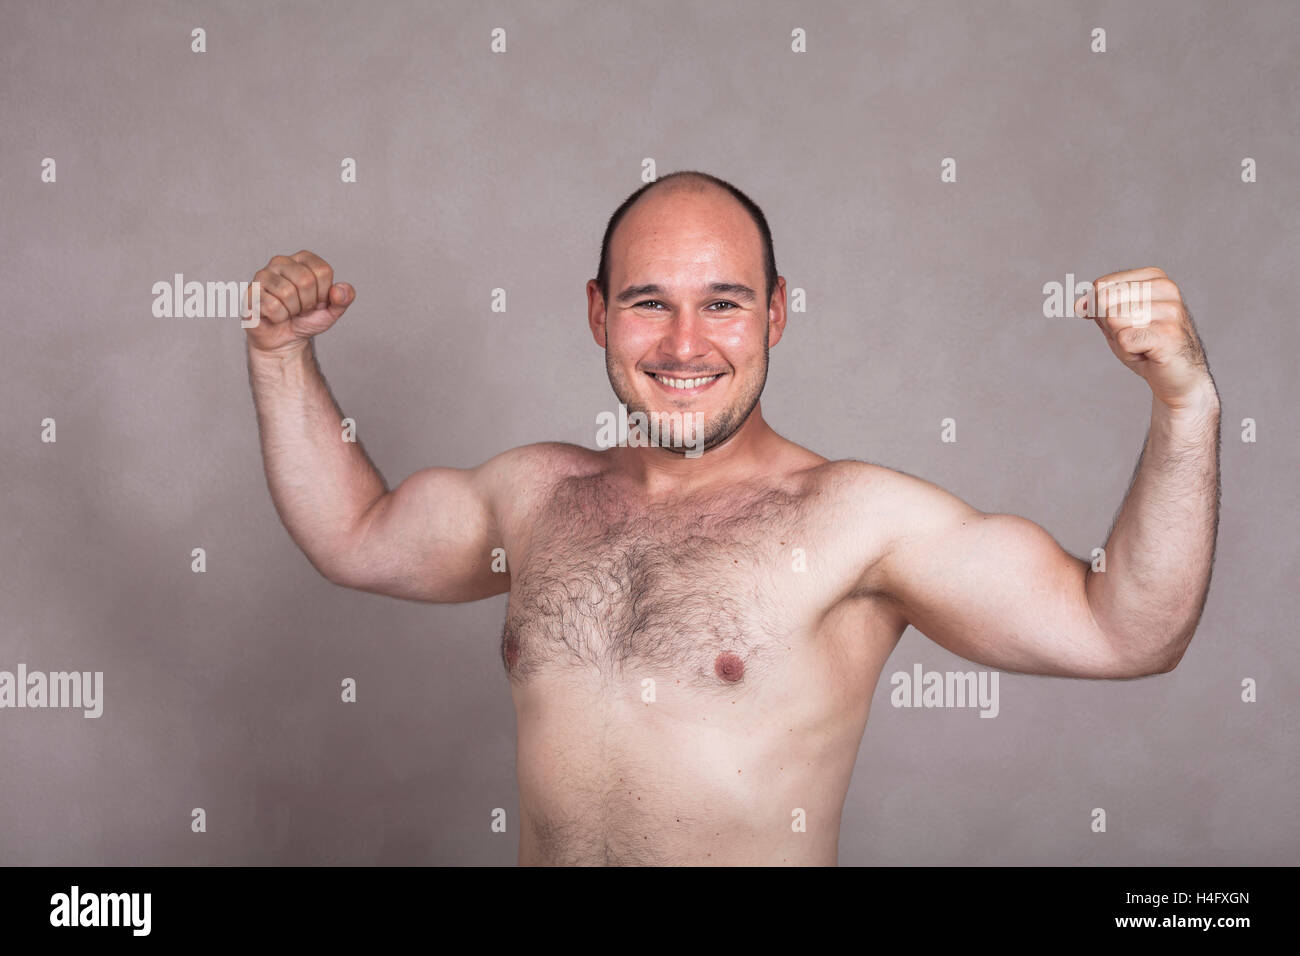 Portrait of happy shirtless man posing and showing his strong arms and hairy body. Stock Photo